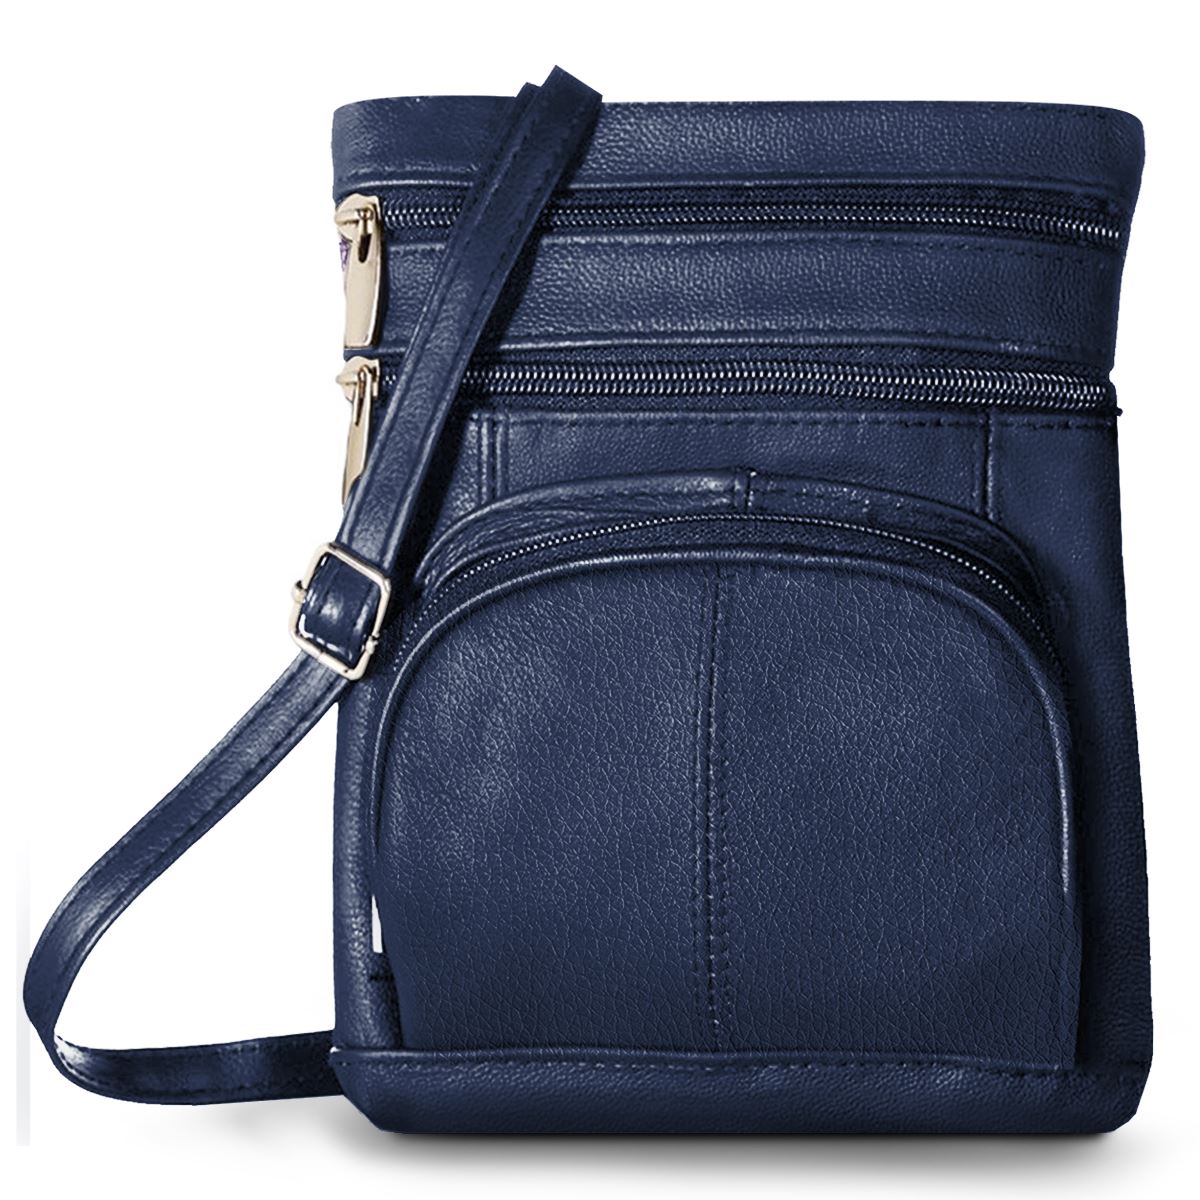 A Soft Leather Crossbody Bag with Wallet Organizer. Less stress on your back more ways to spice up your outfit.